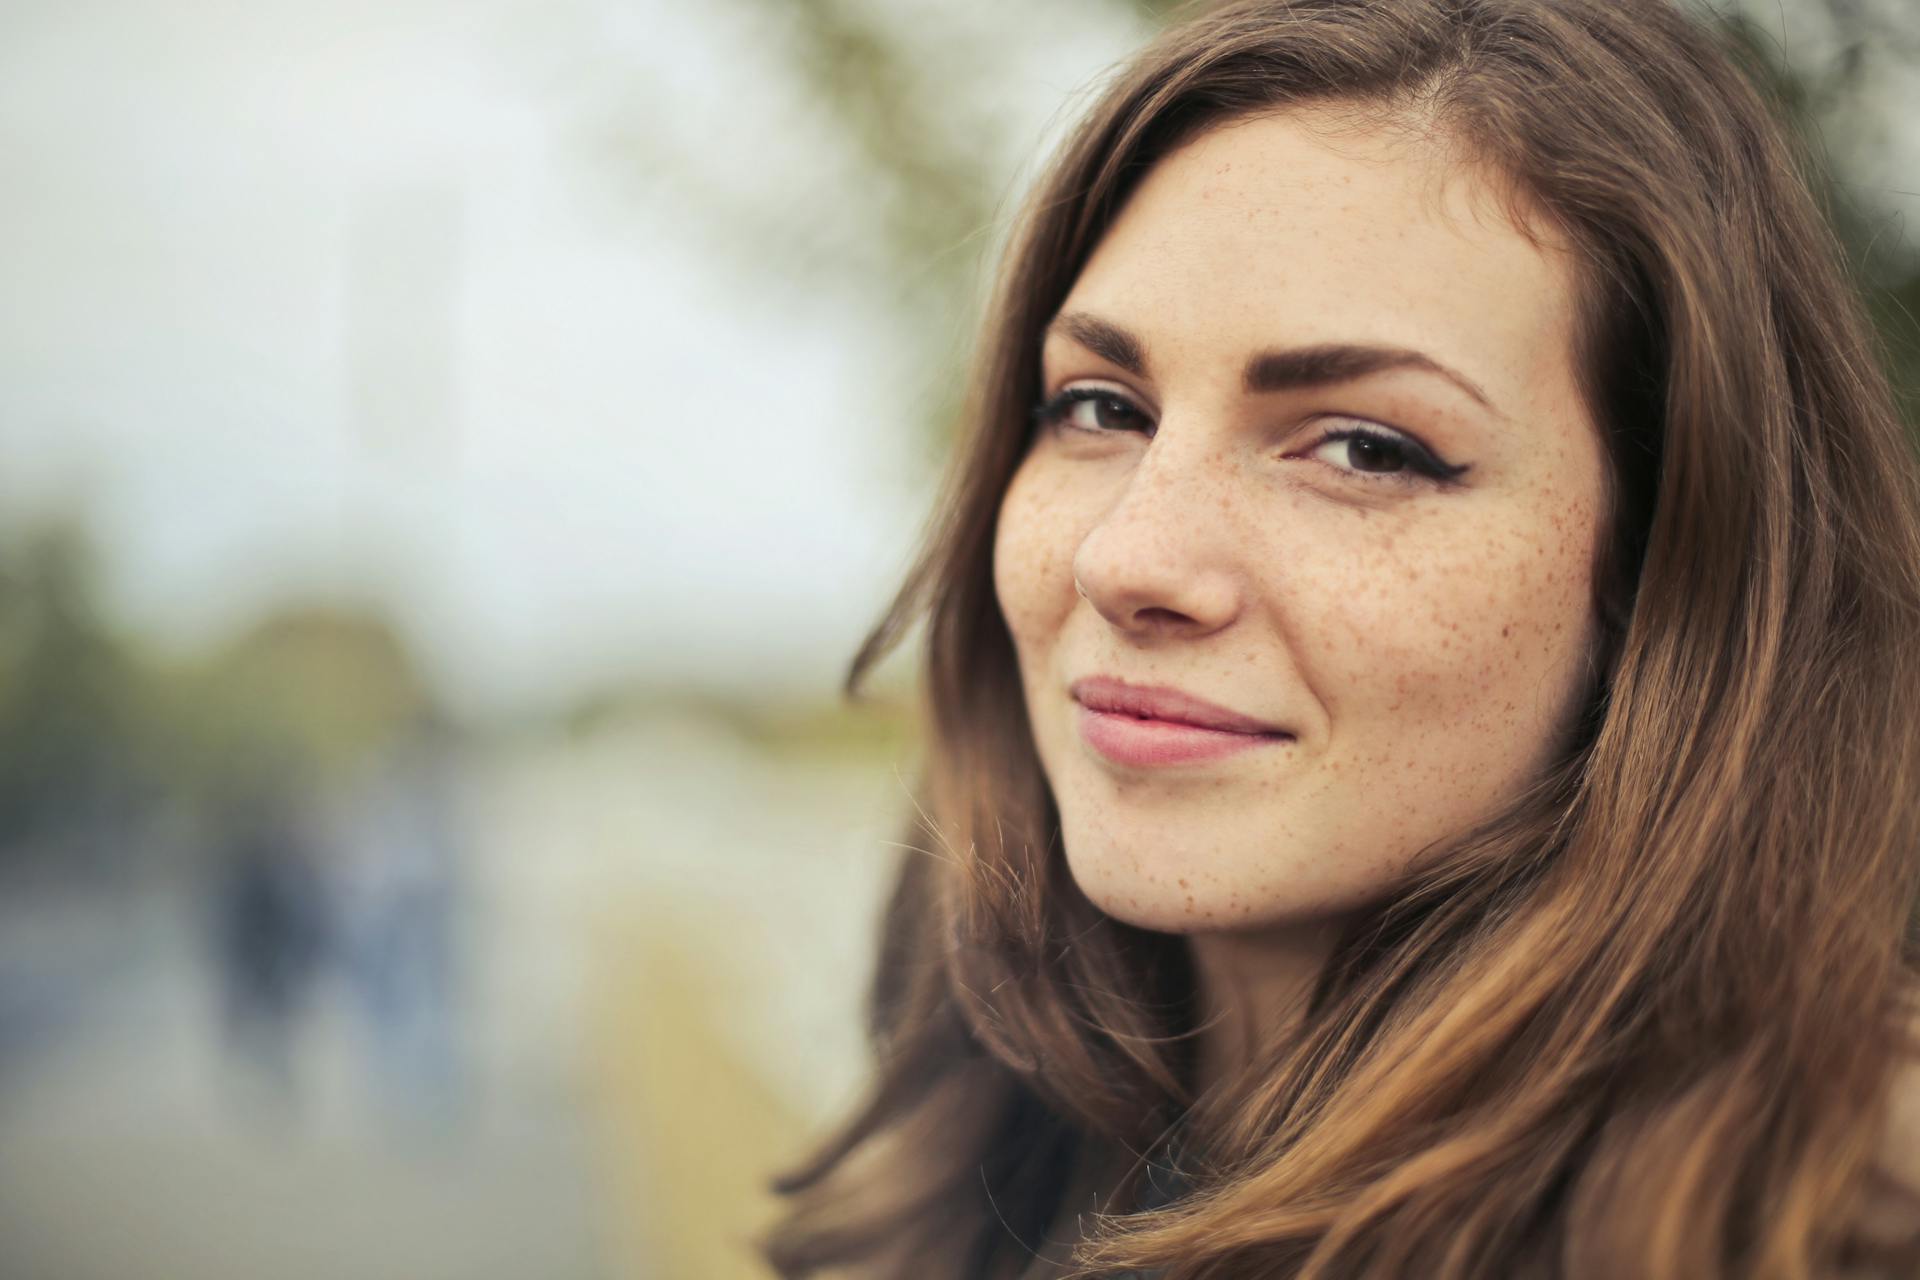 A close-up of a smiling woman | Source: Pexels